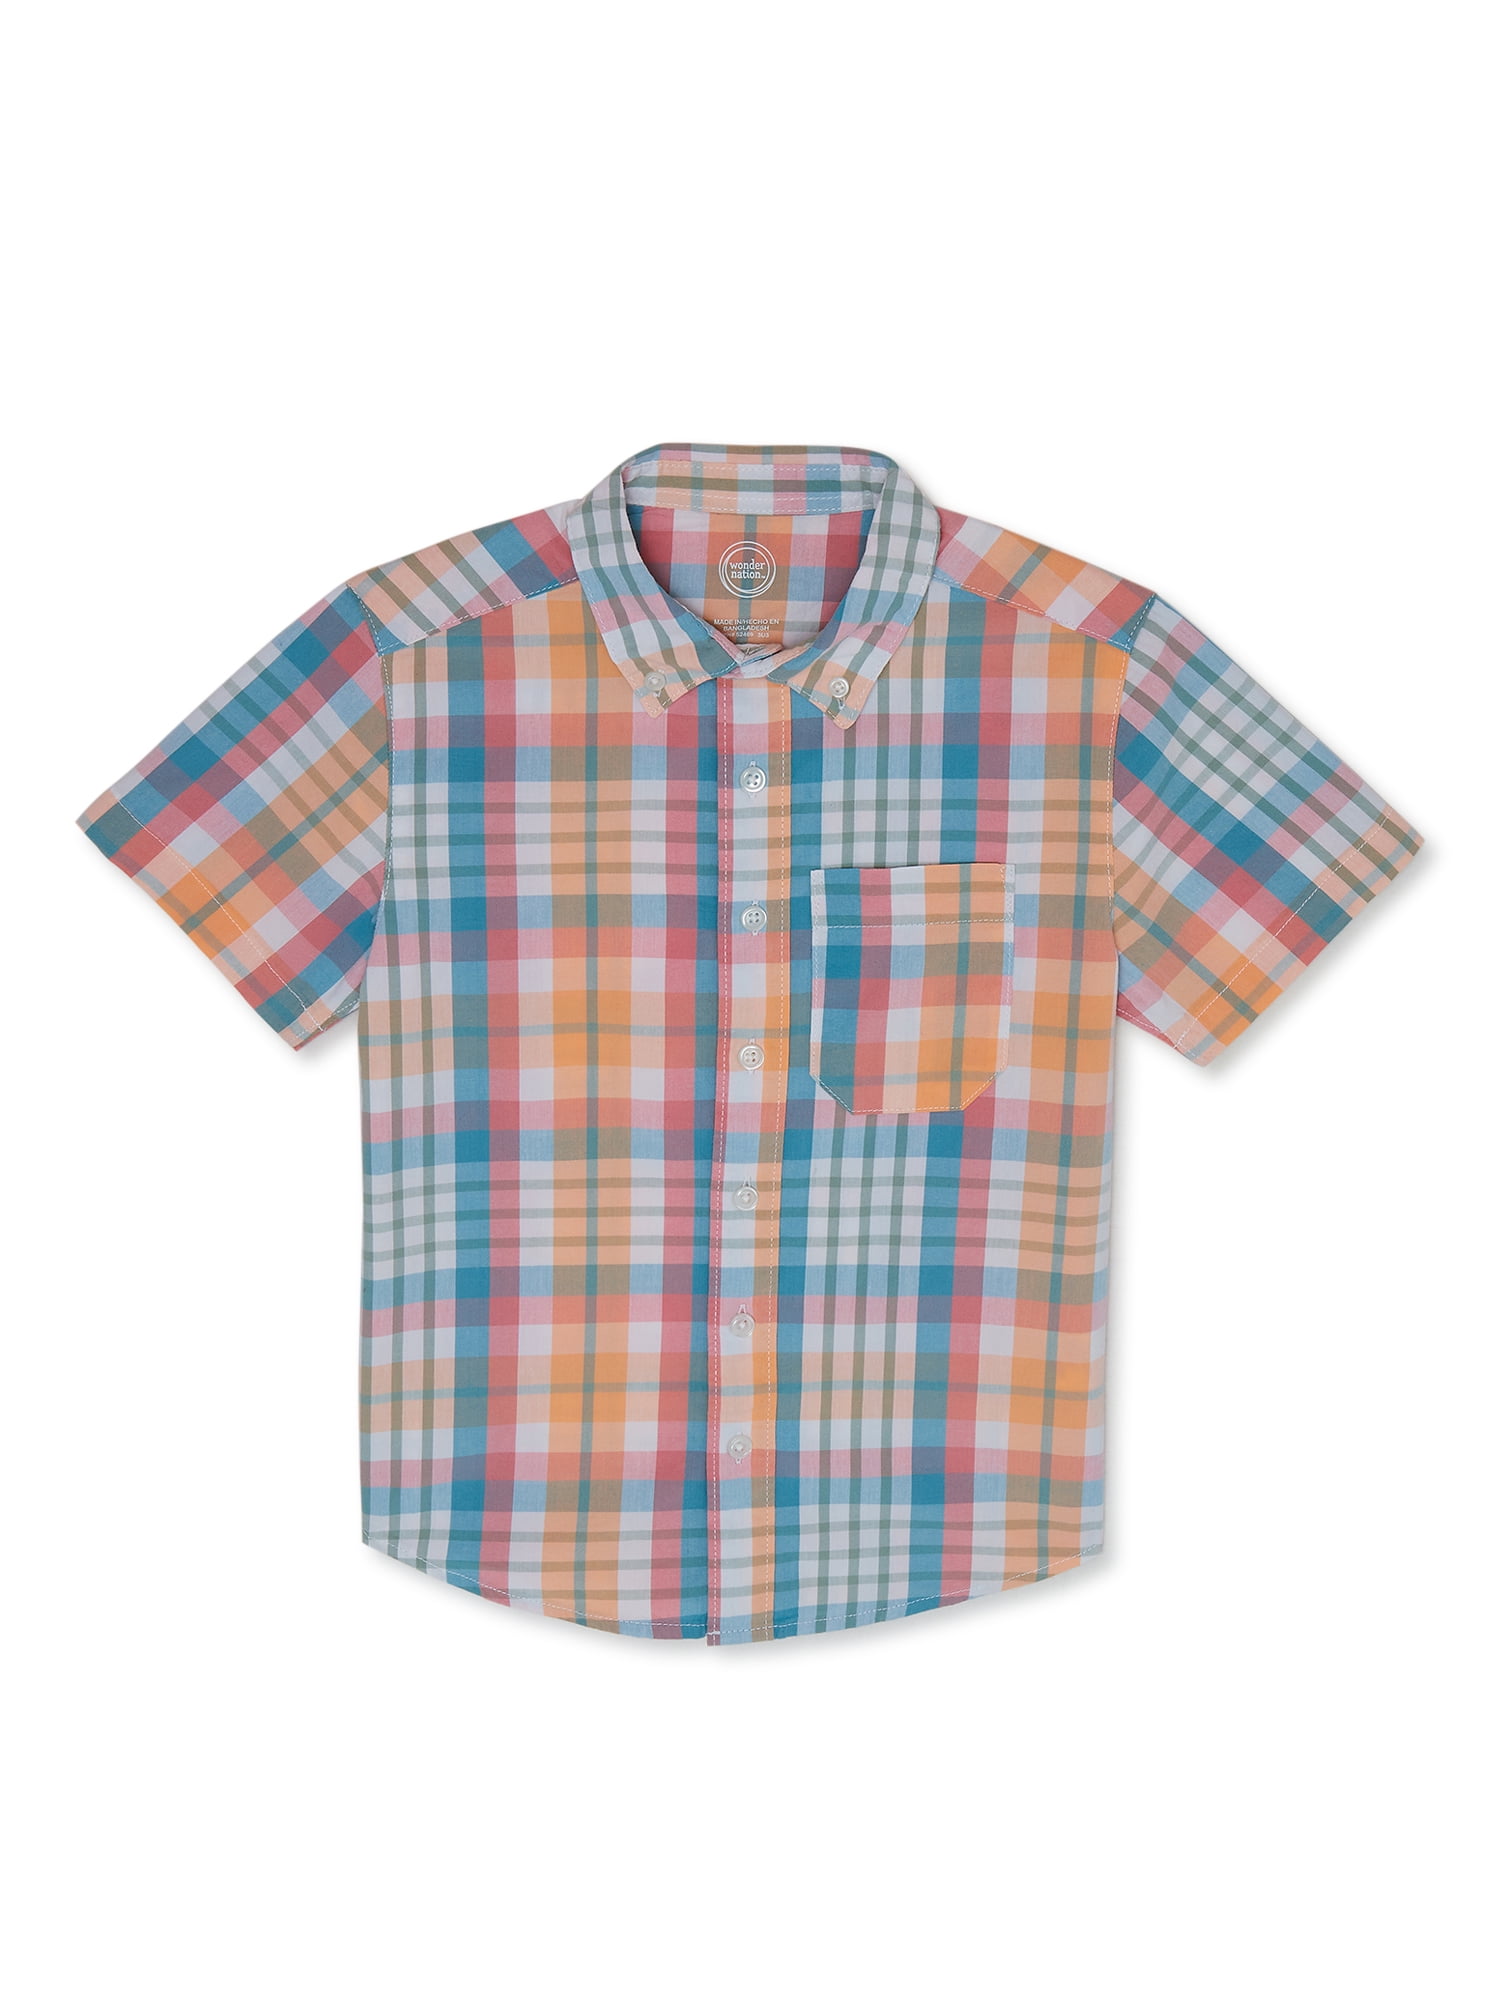 Wonder Nation Boys Woven Button Up T-Shirt with Short Sleeves, Sizes 4 ...